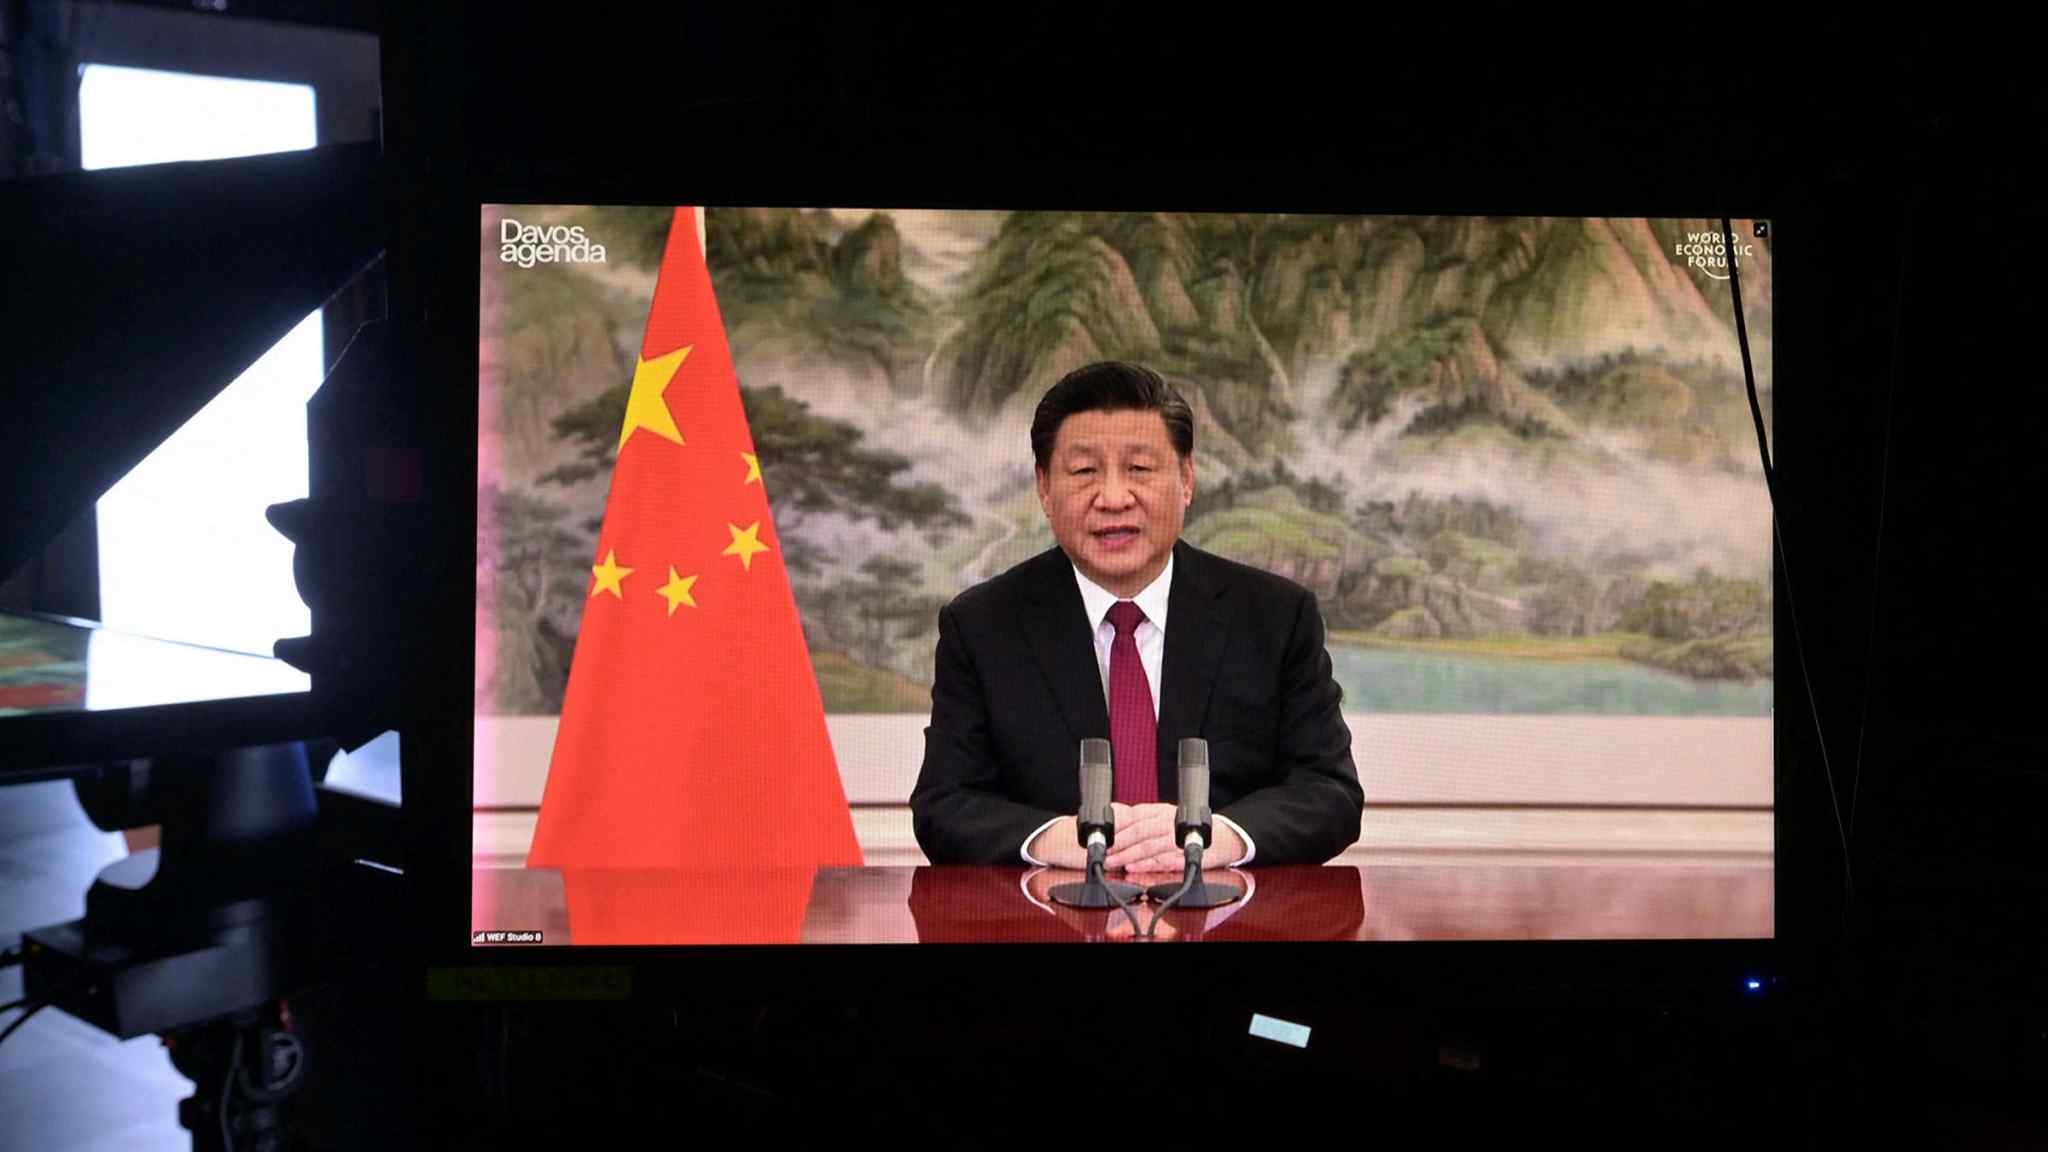 Xi defends crackdowns in ‘common prosperity’ drive